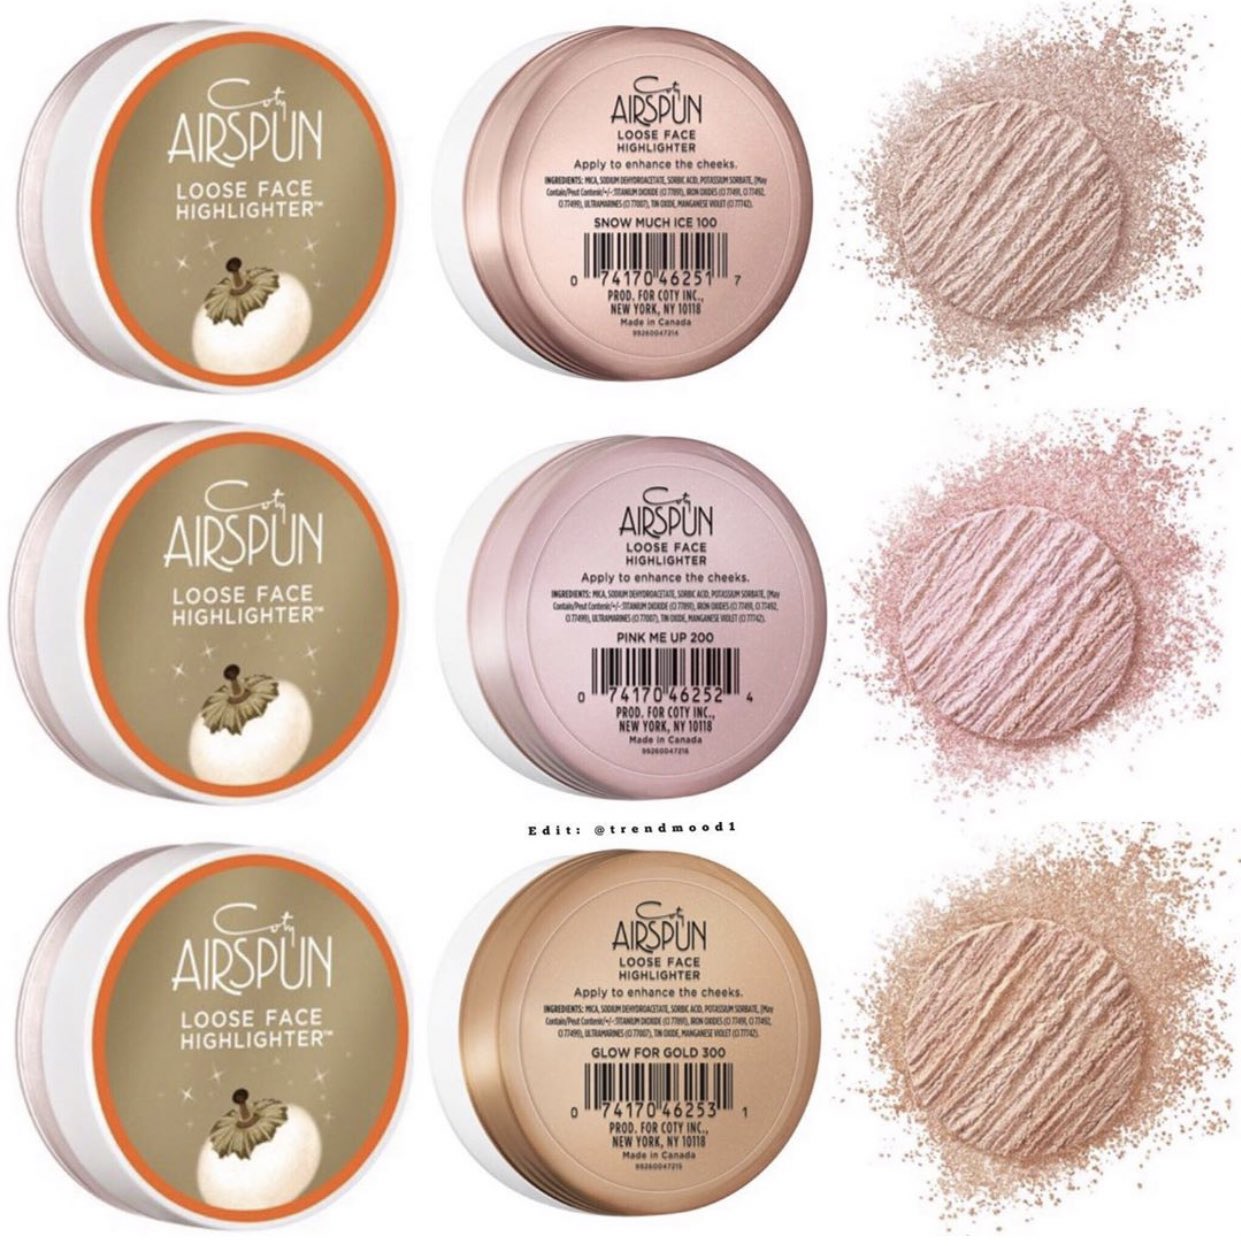 Trendmood on X: Available Now! 🚨 LINK ➡️  online  @walmart & In Stores ✨💛 NEW! Loose Face #Highlighters ✨ @airspunofficial  in 3 different shades!!!✨$5.97 each : Snow Much Ice Pink Me